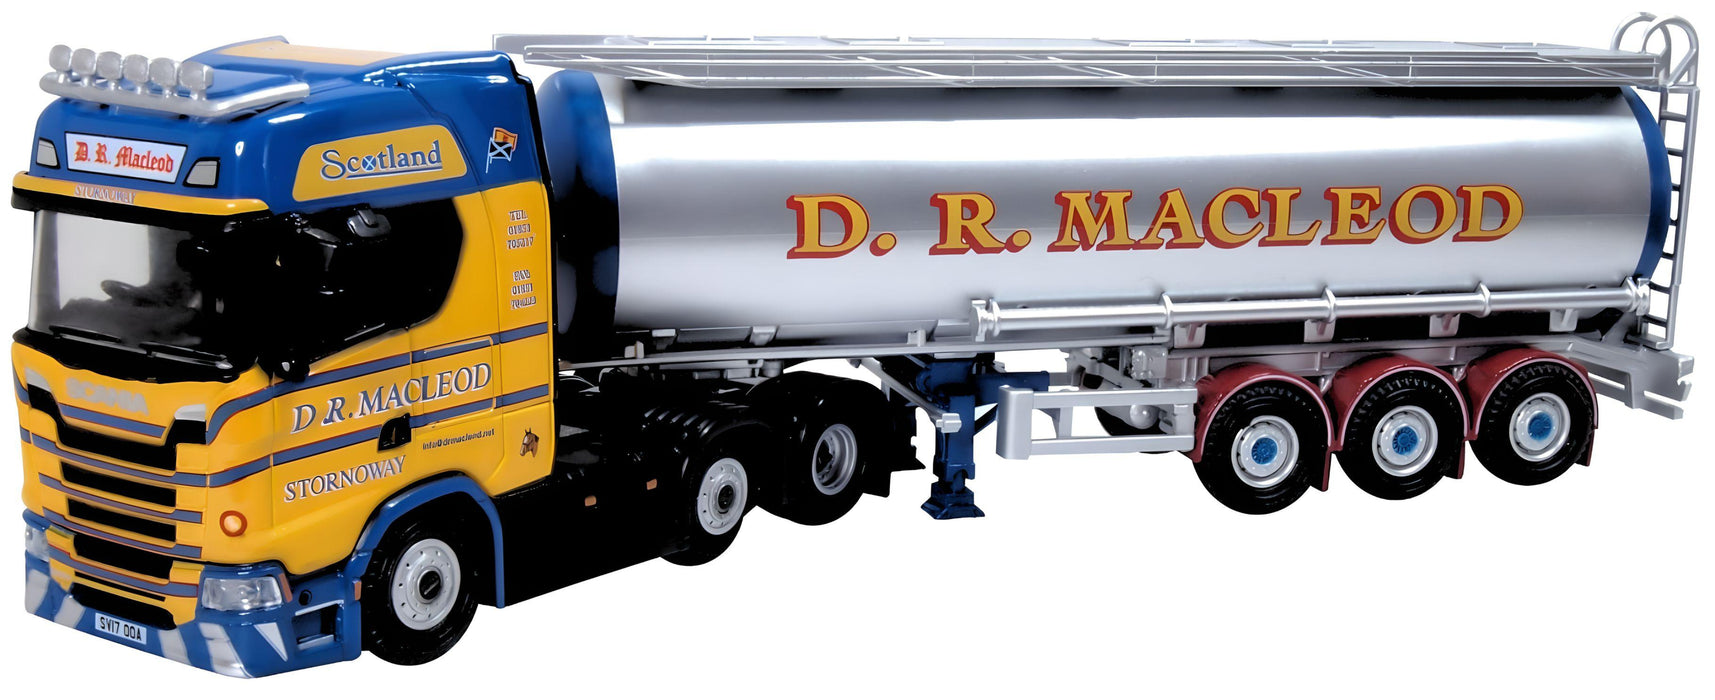 Oxford Diecast D R Macleod Scania New Generation S Cylindrical Tanker 1:76 Scale